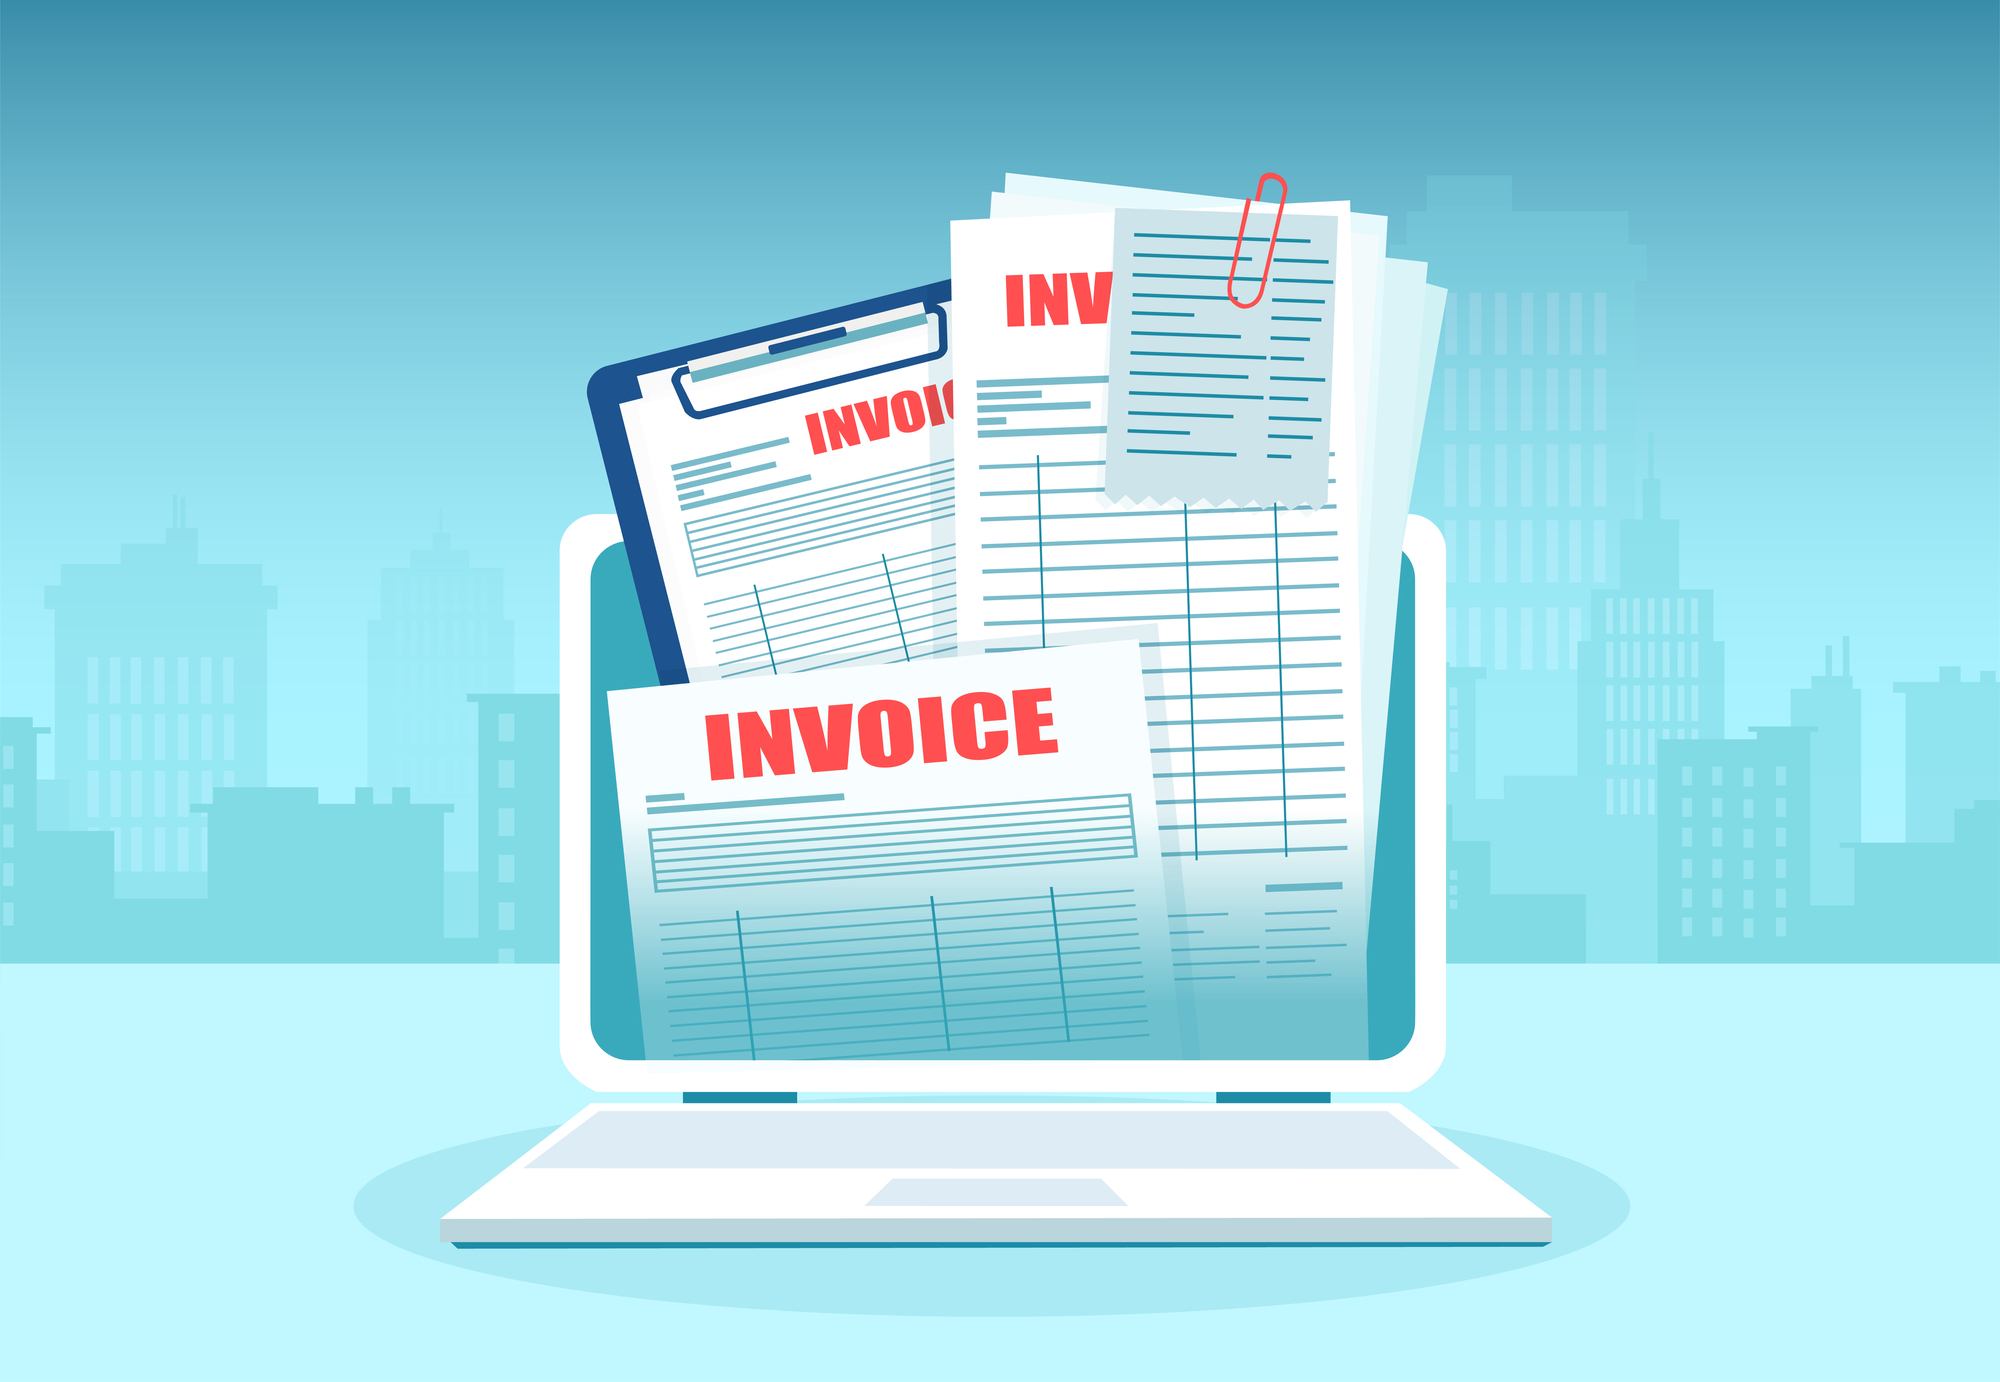 Invoice-templates-coming-from-laptop-screen